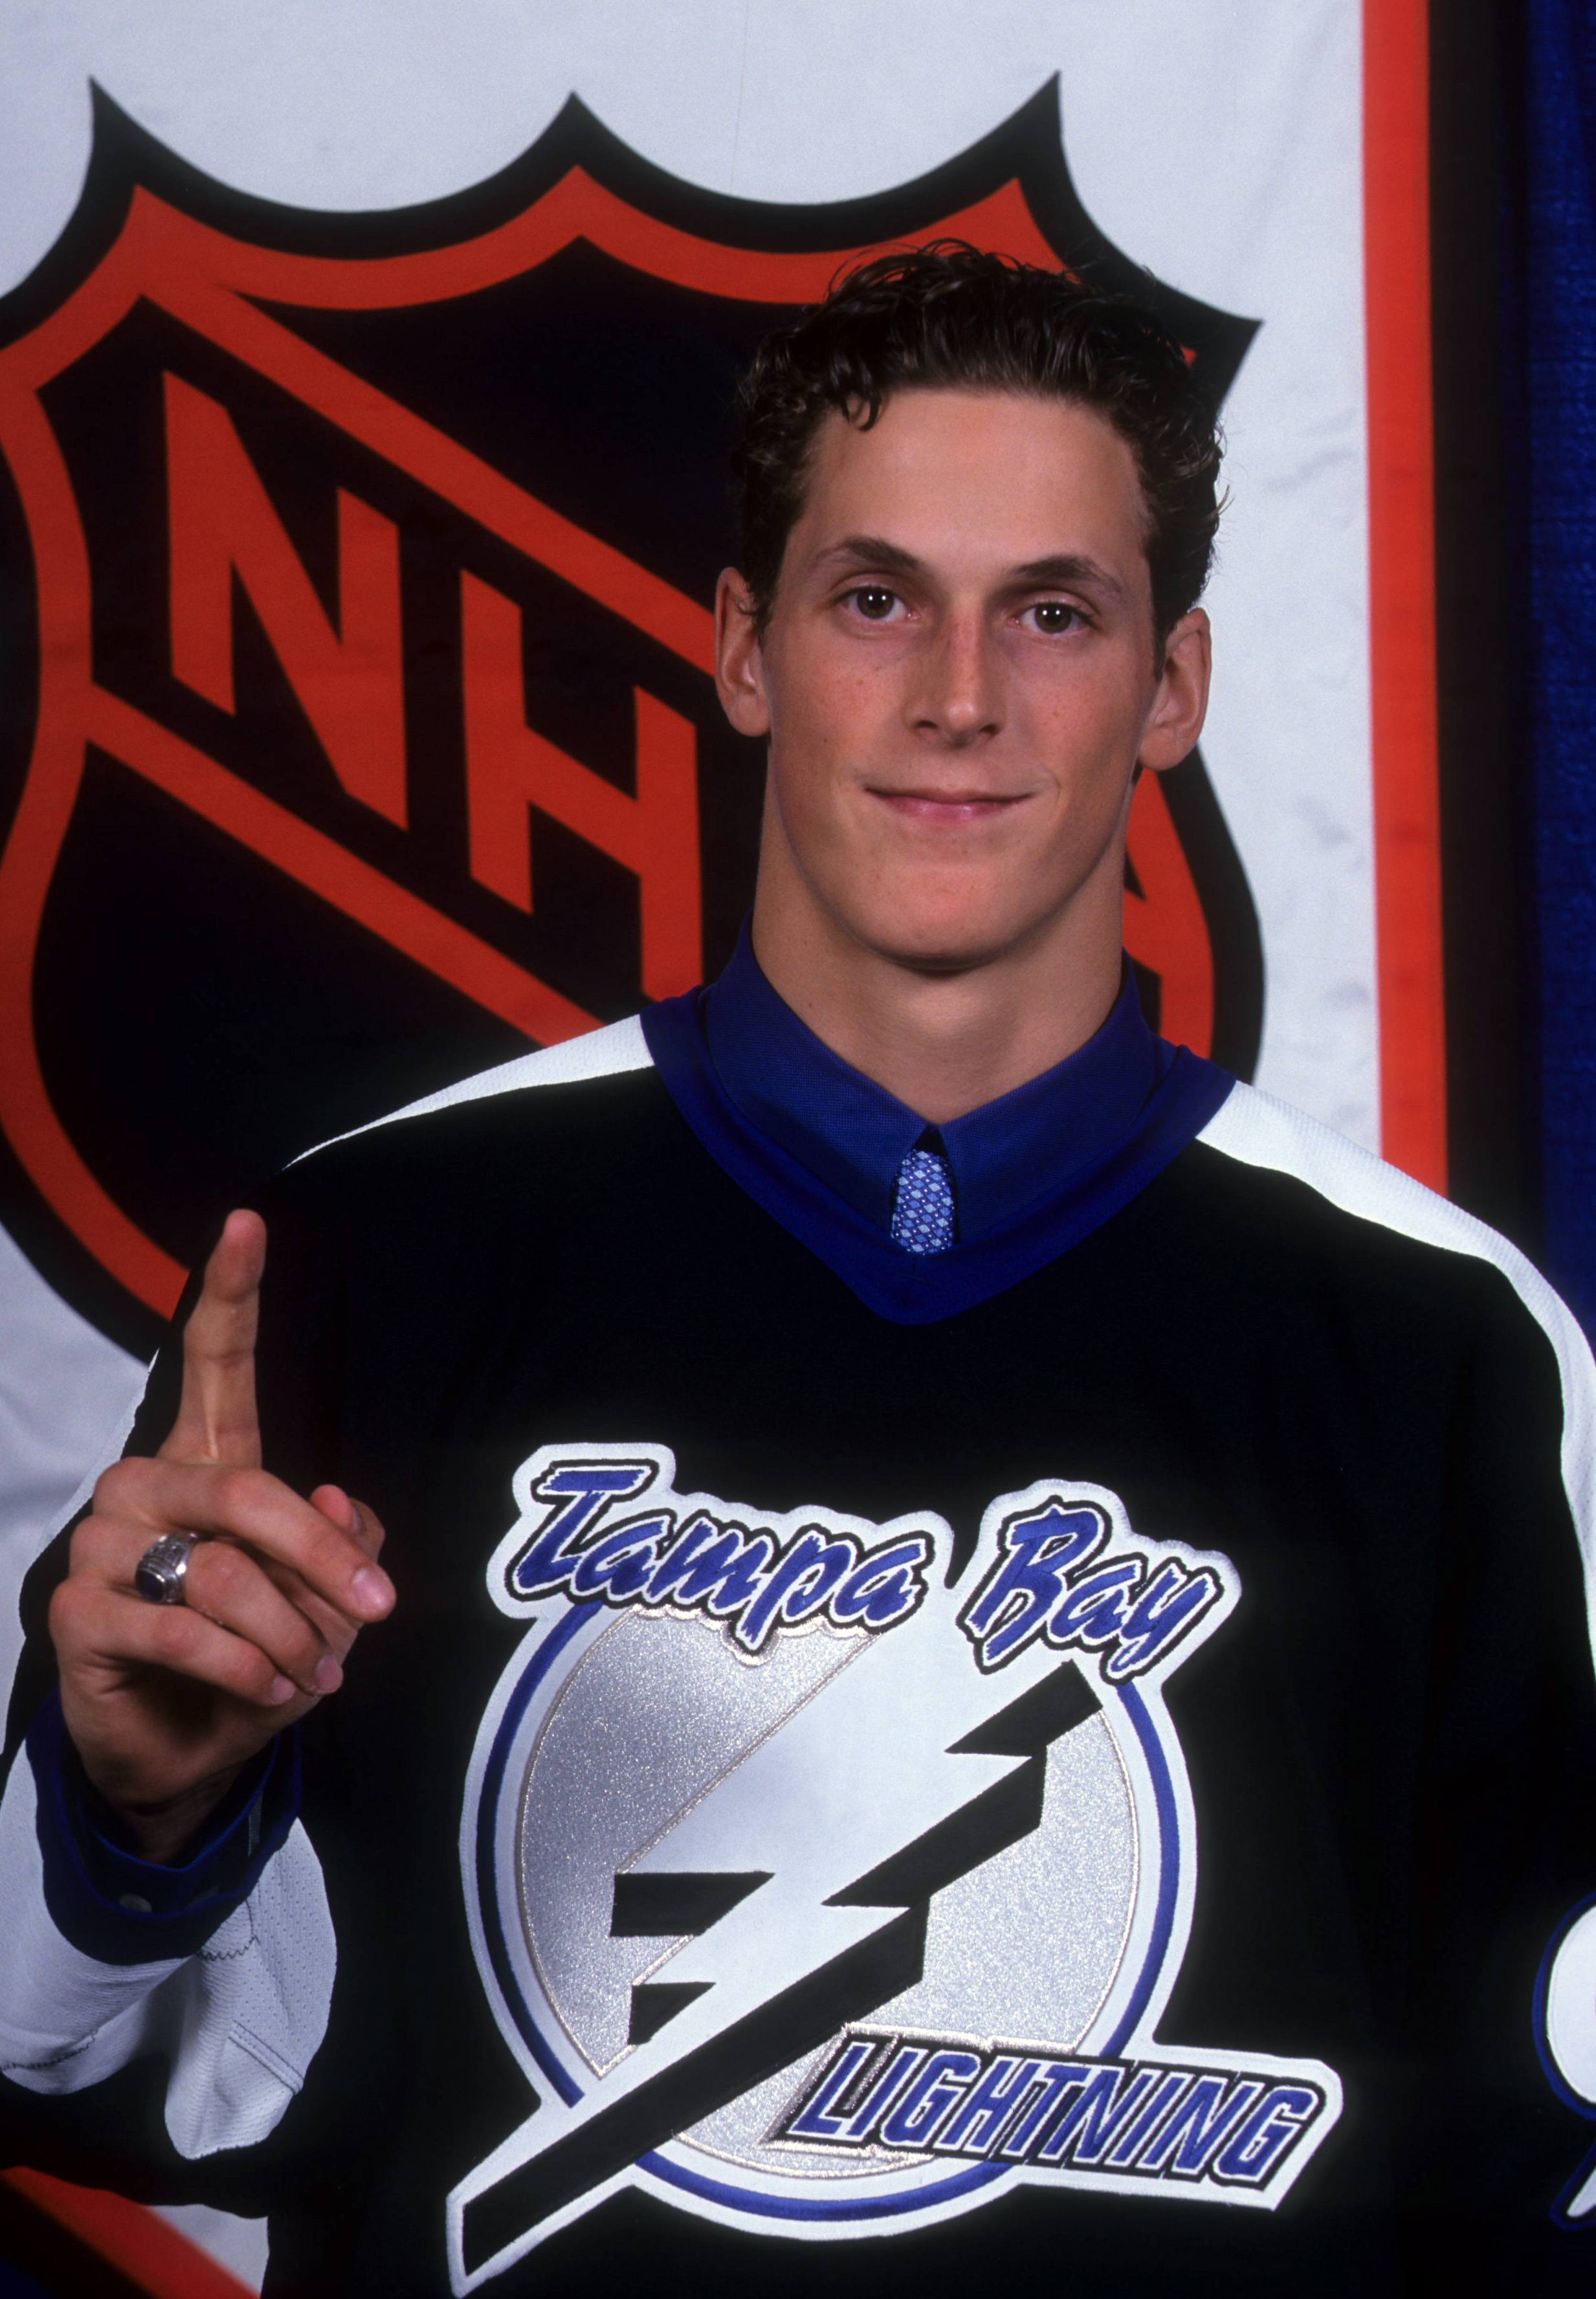 4 memorable moments from Vincent Lecavalier's NHL career